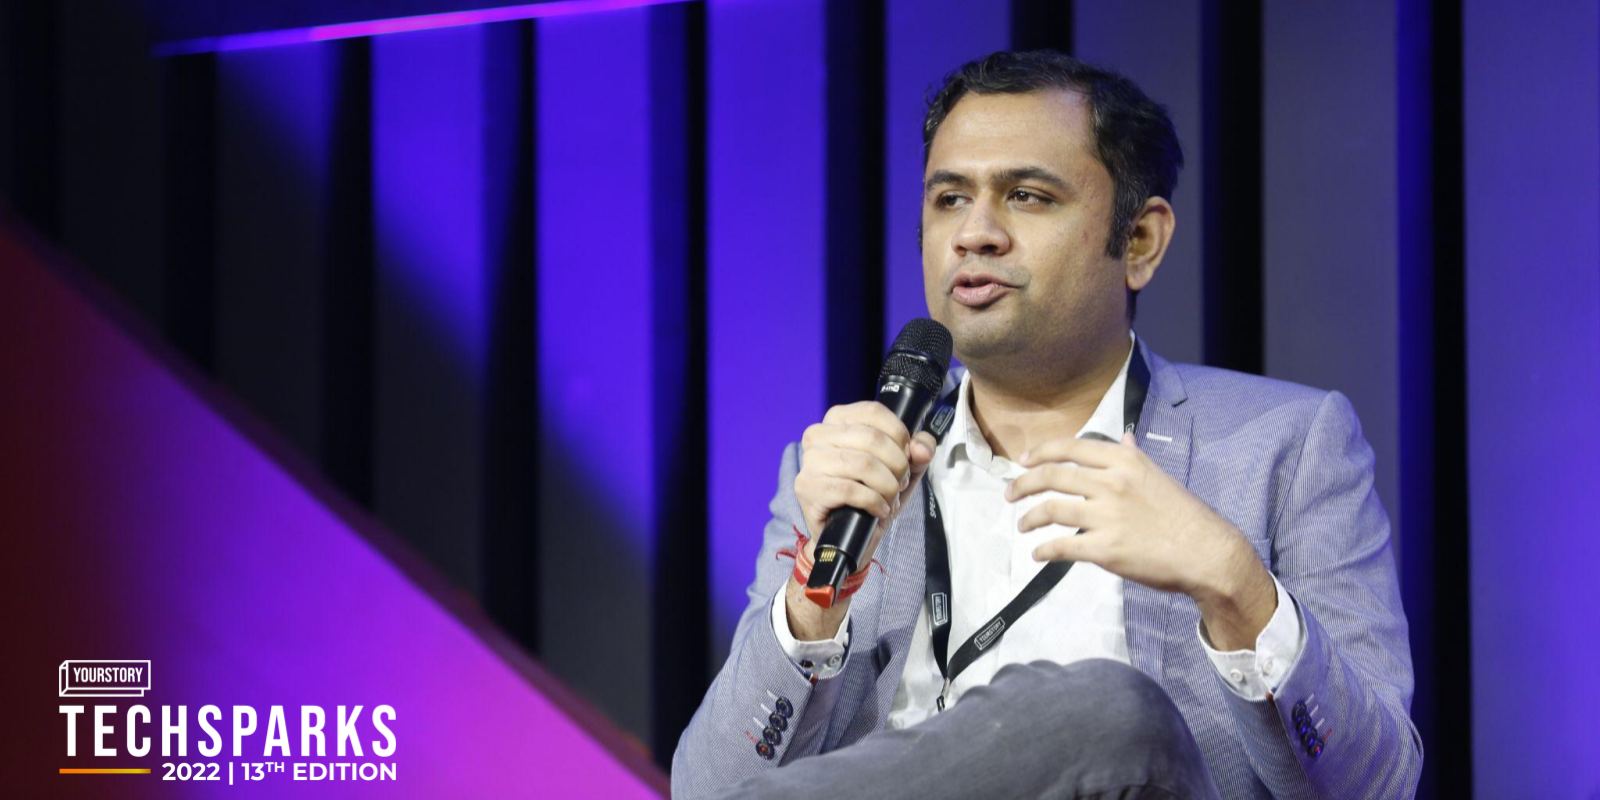 Razorpay's Harshil Mathur says user-specific fintech will be next big focus area